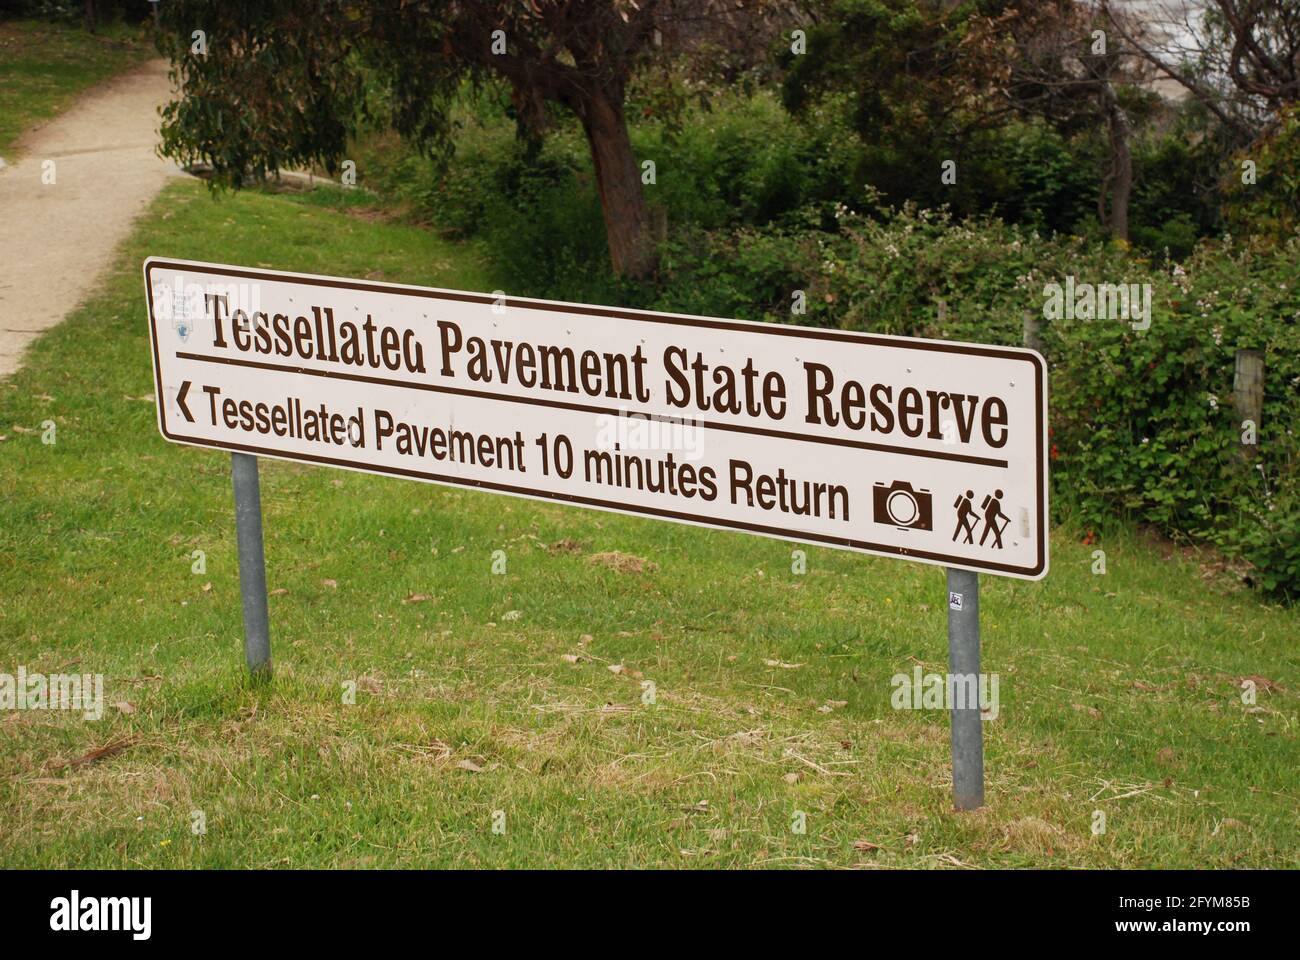 Tessellated Pavement State Reserve sign at Eaglehawk Neck in Tasmania, Australia Stock Photo